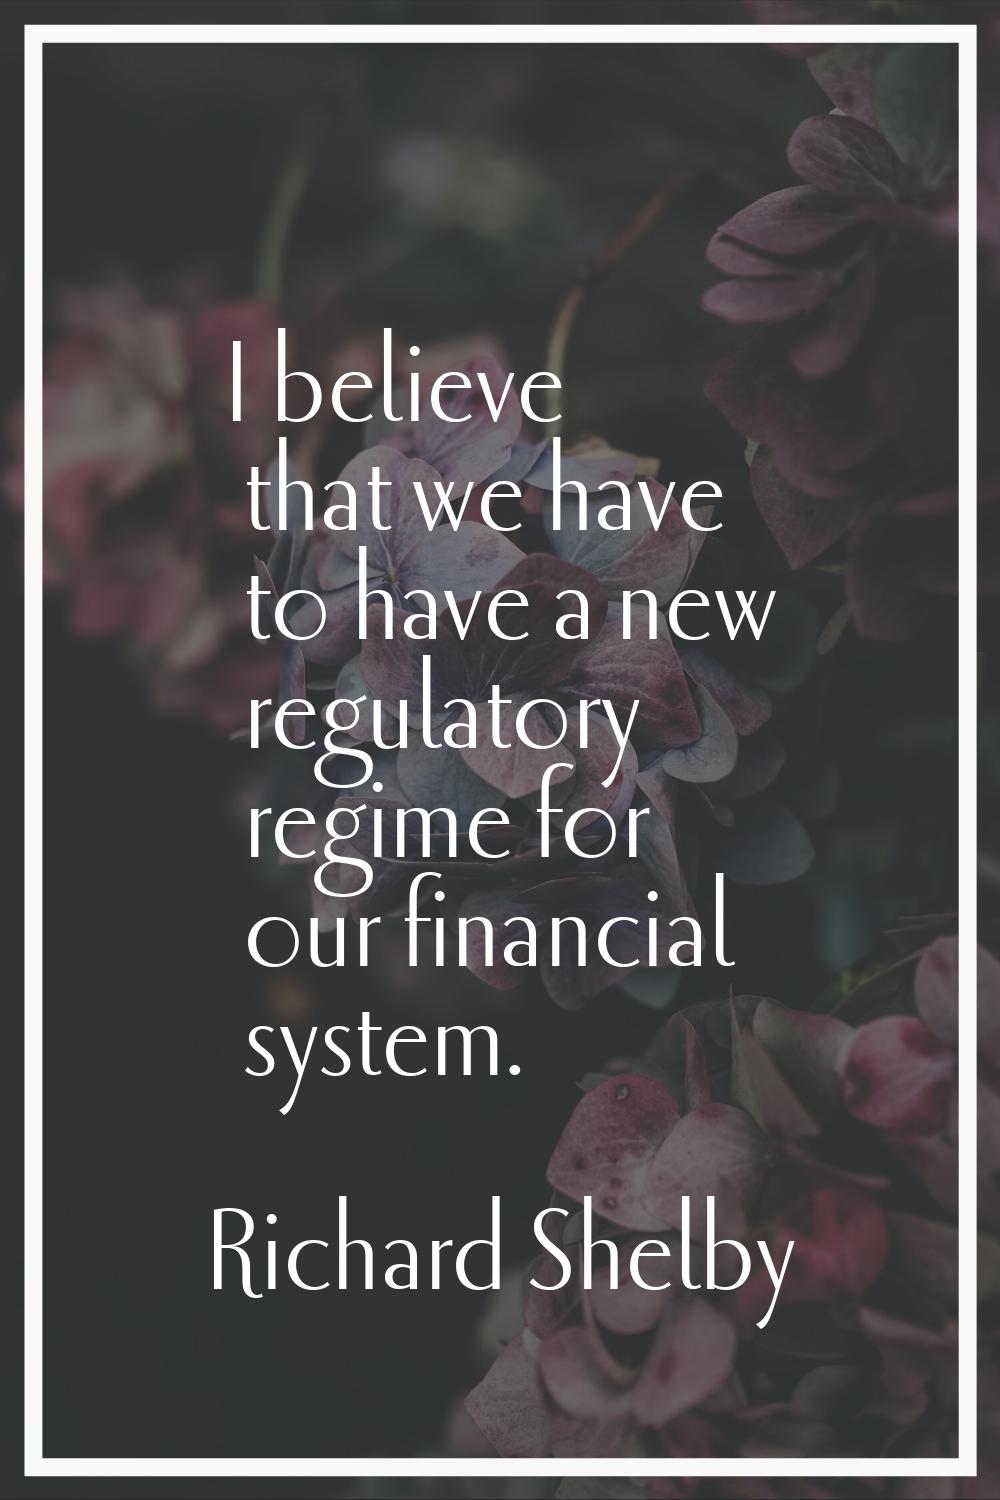 I believe that we have to have a new regulatory regime for our financial system.